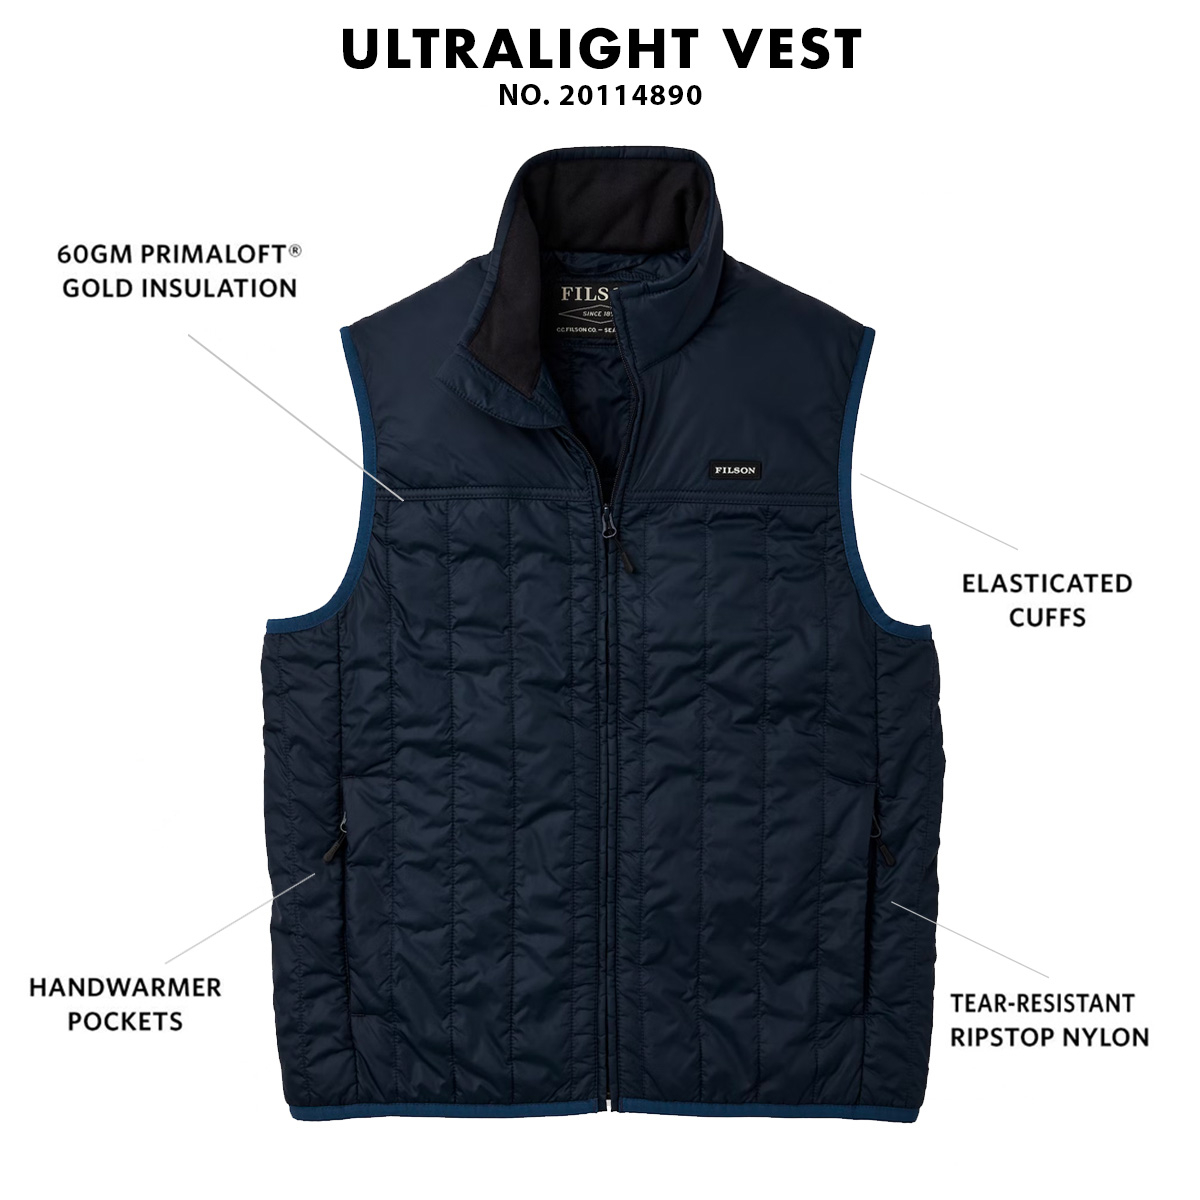 Filson Ultralight Vest Blue Coal, perfect as an outer layer or underneath a heavy jacket for warmth in extreme cold